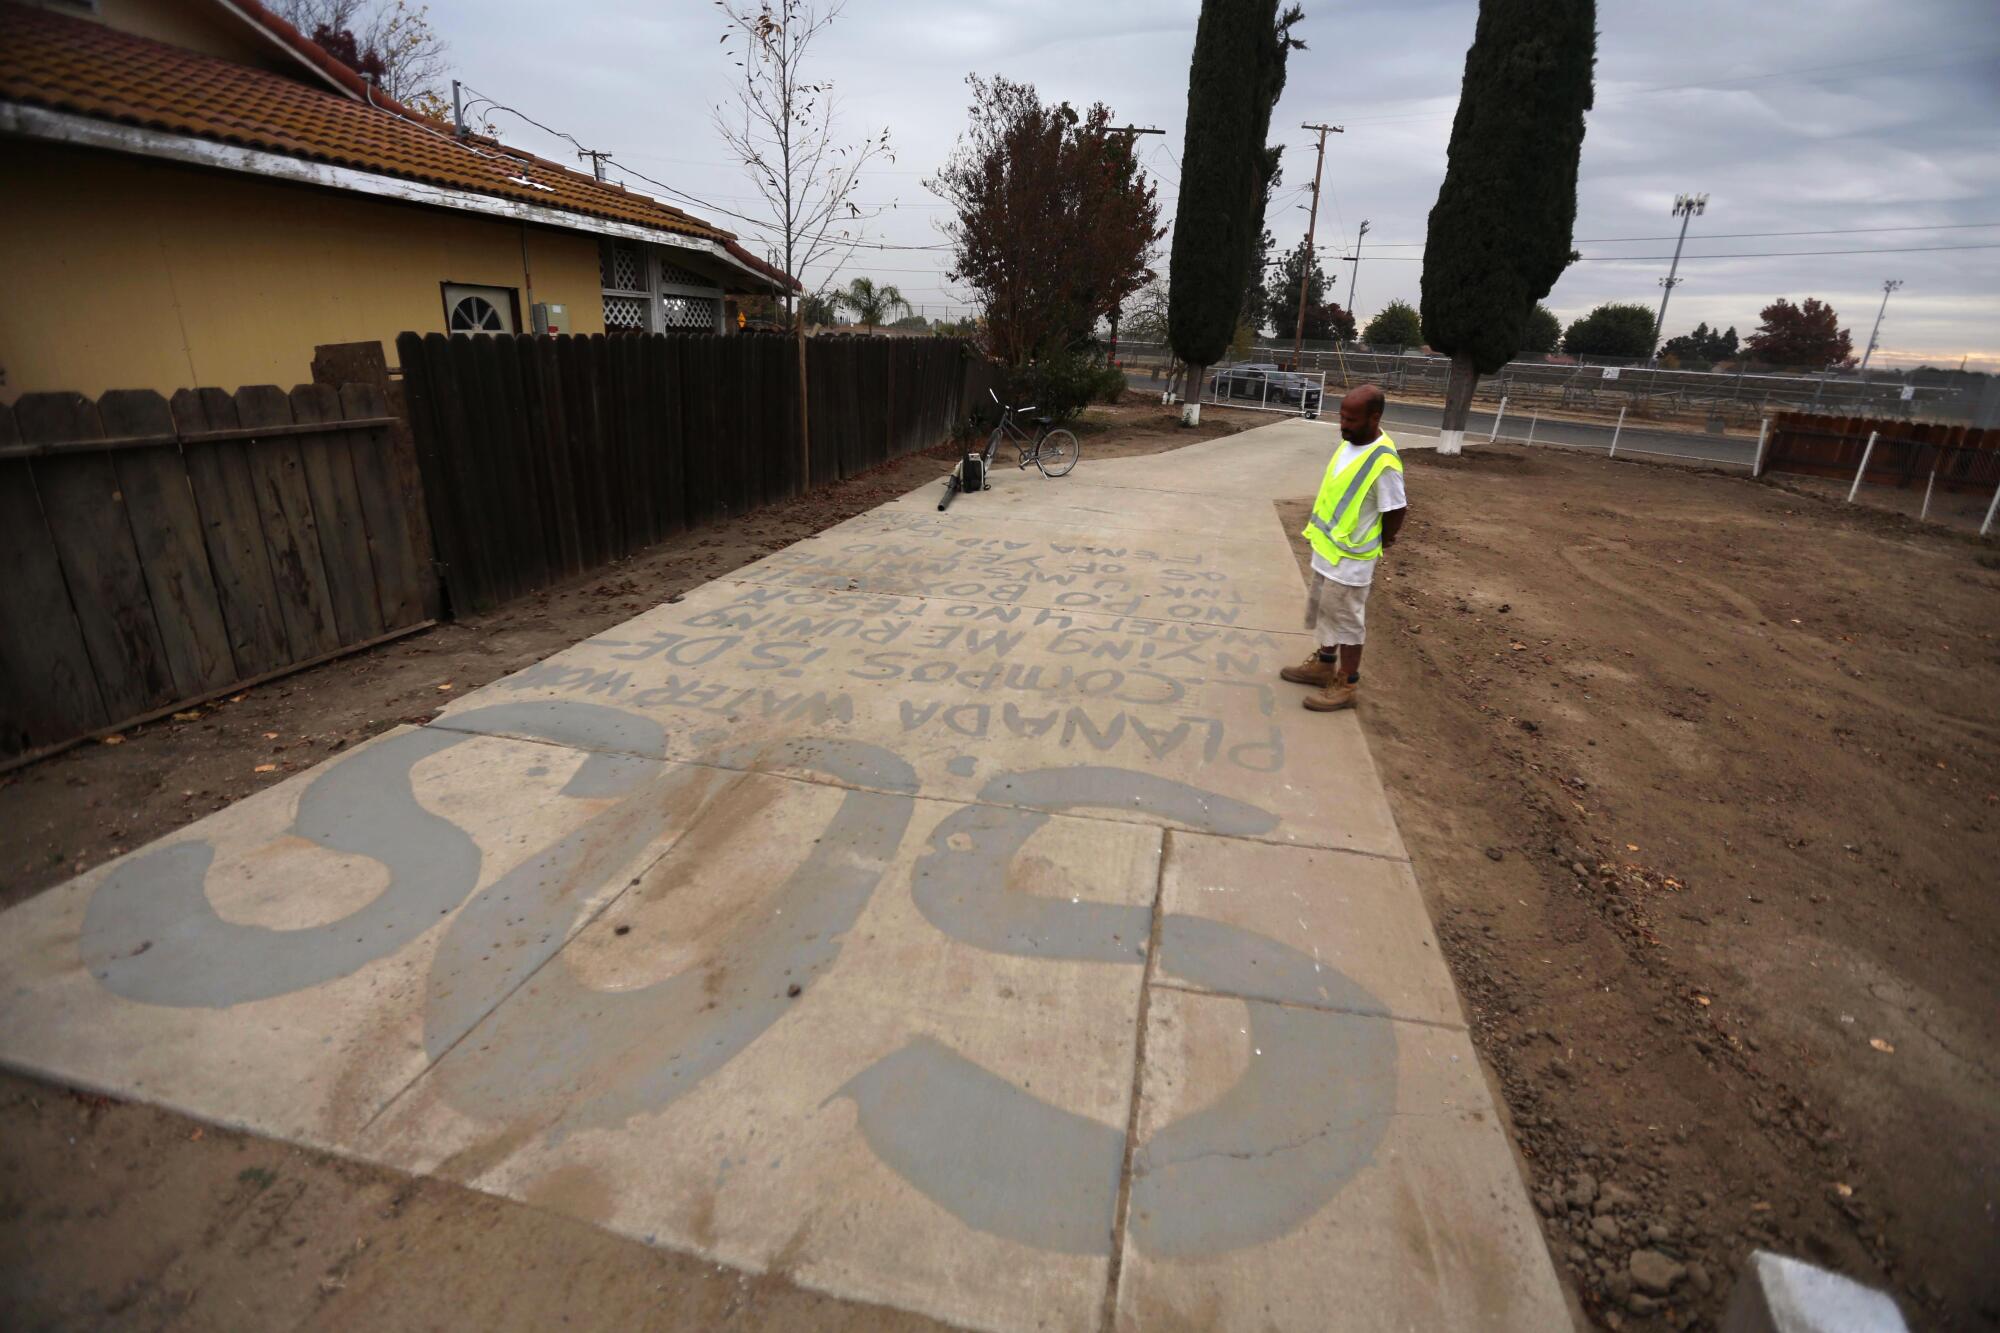  A man stands on a driveway emblazoned with SOS. 